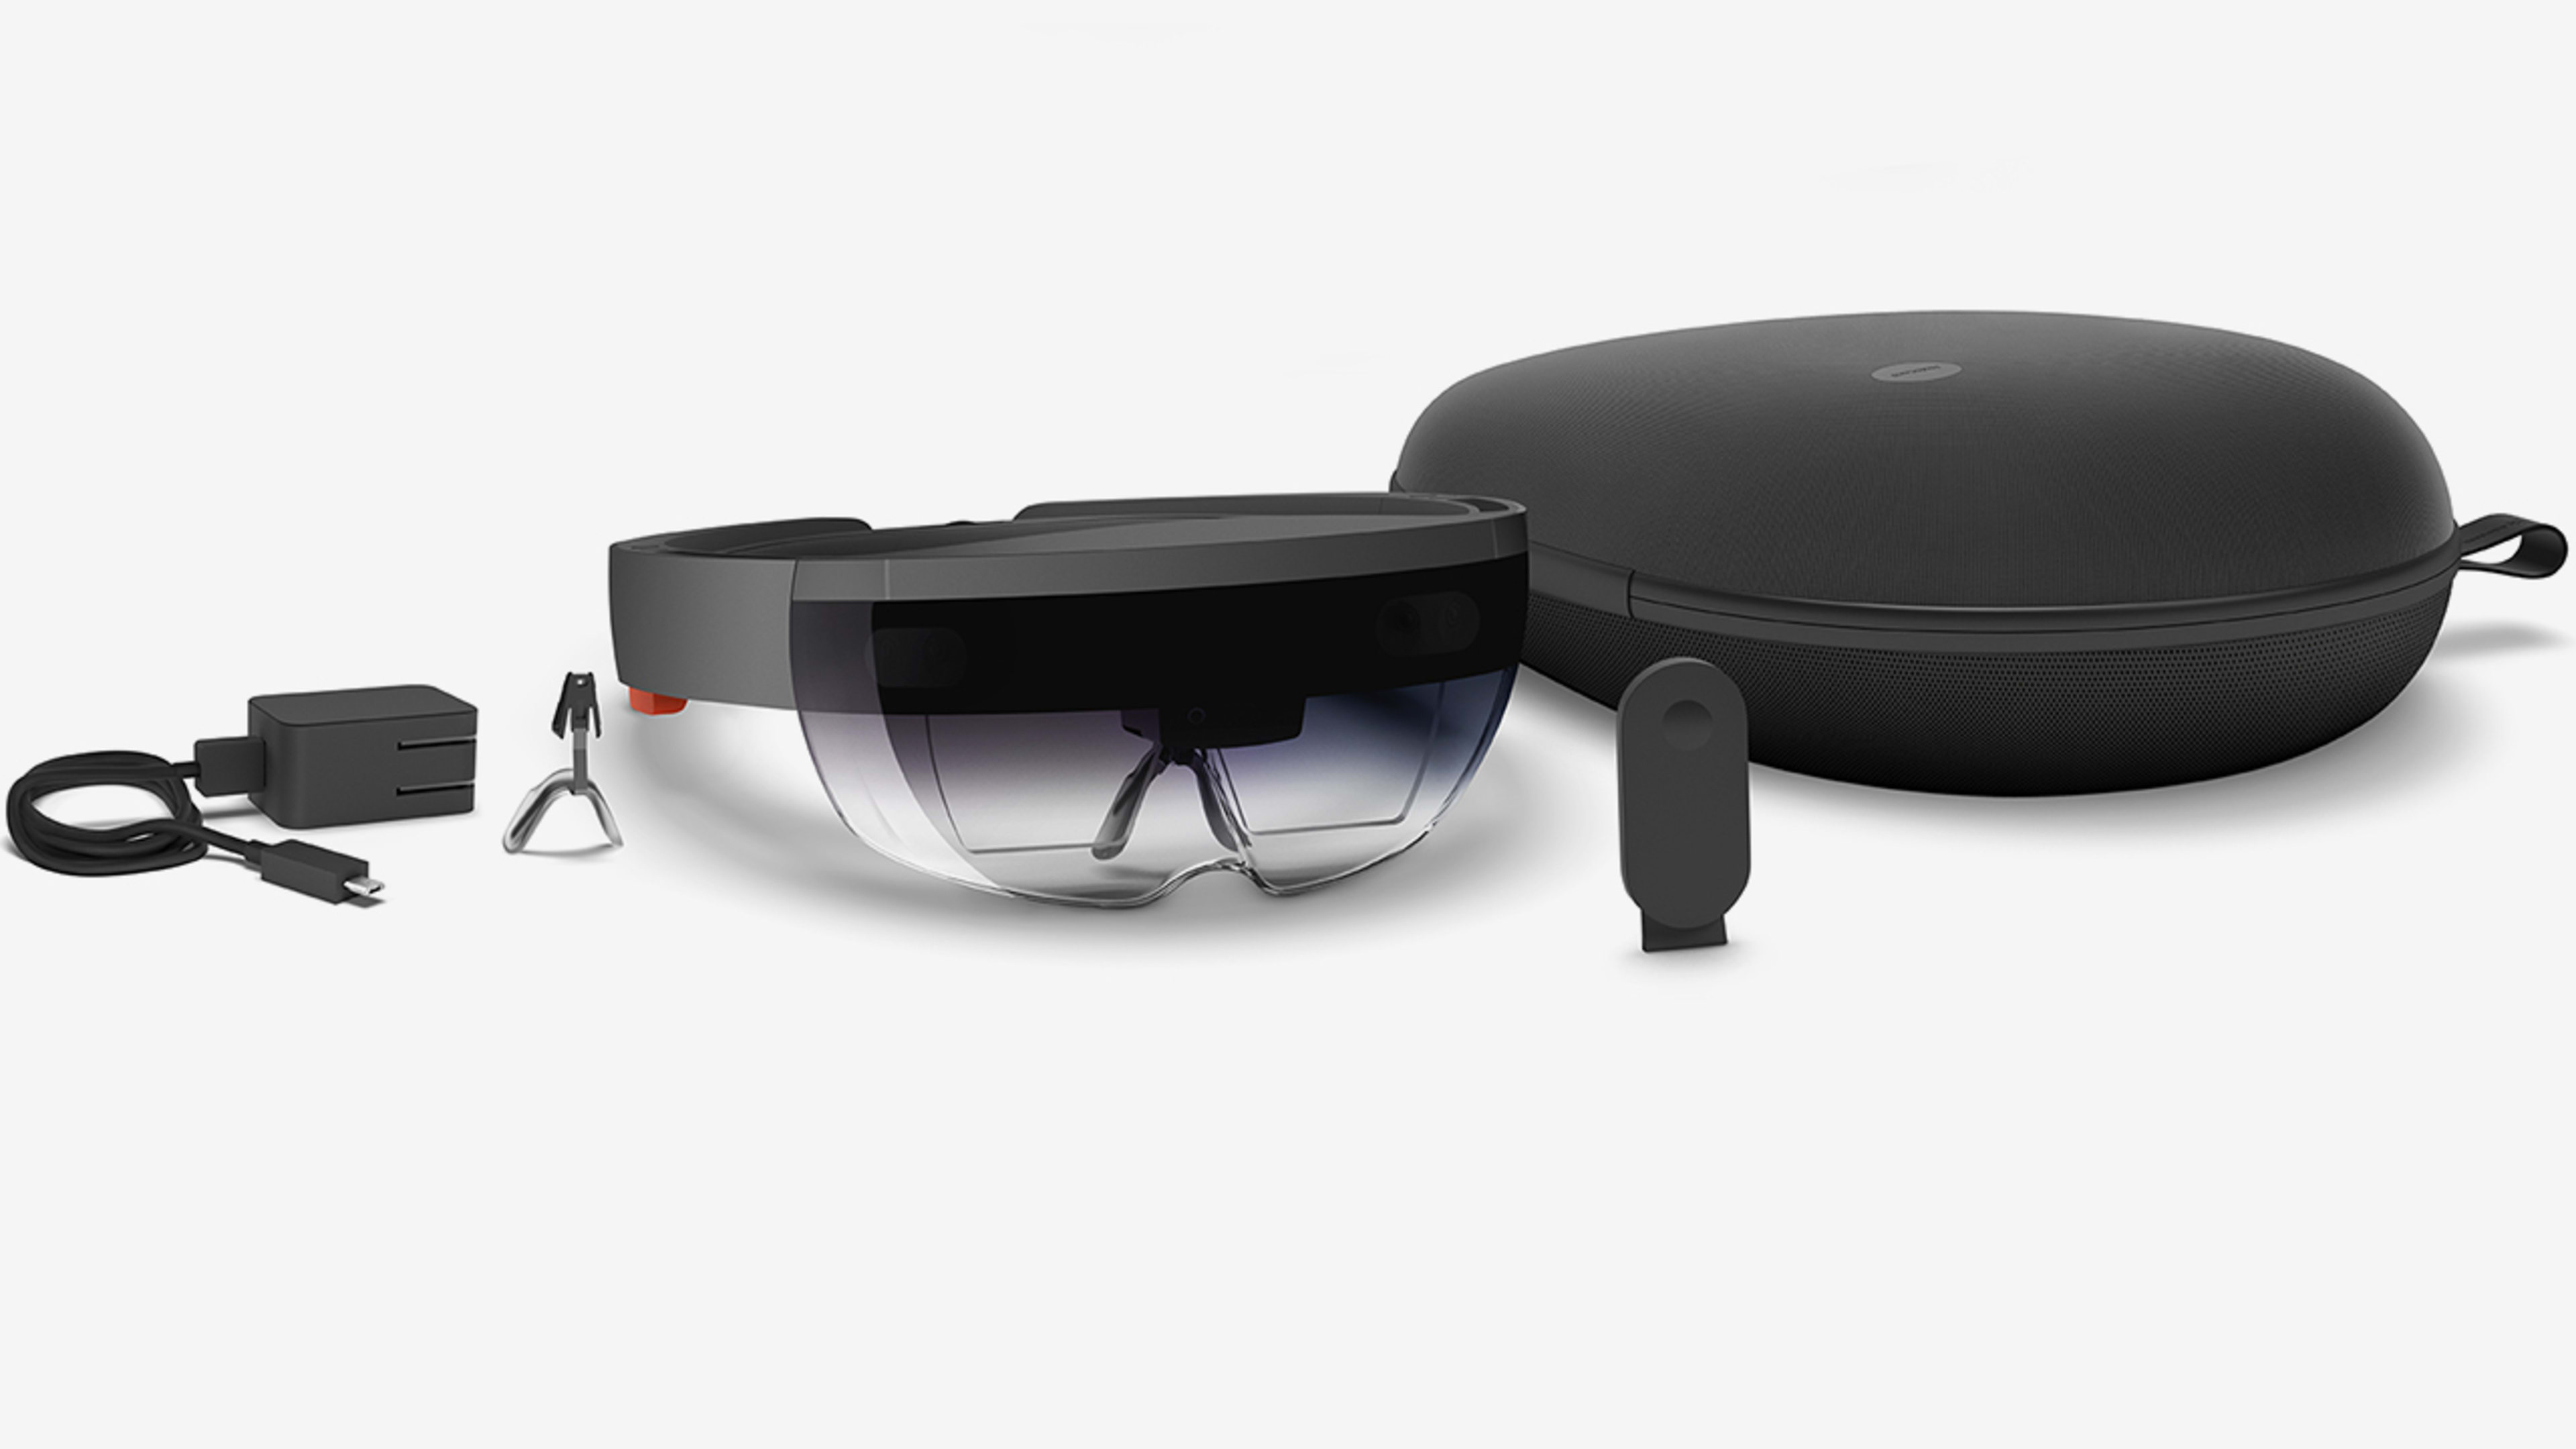 Developers Are About To Get Their Hands On Microsoft’s HoloLens